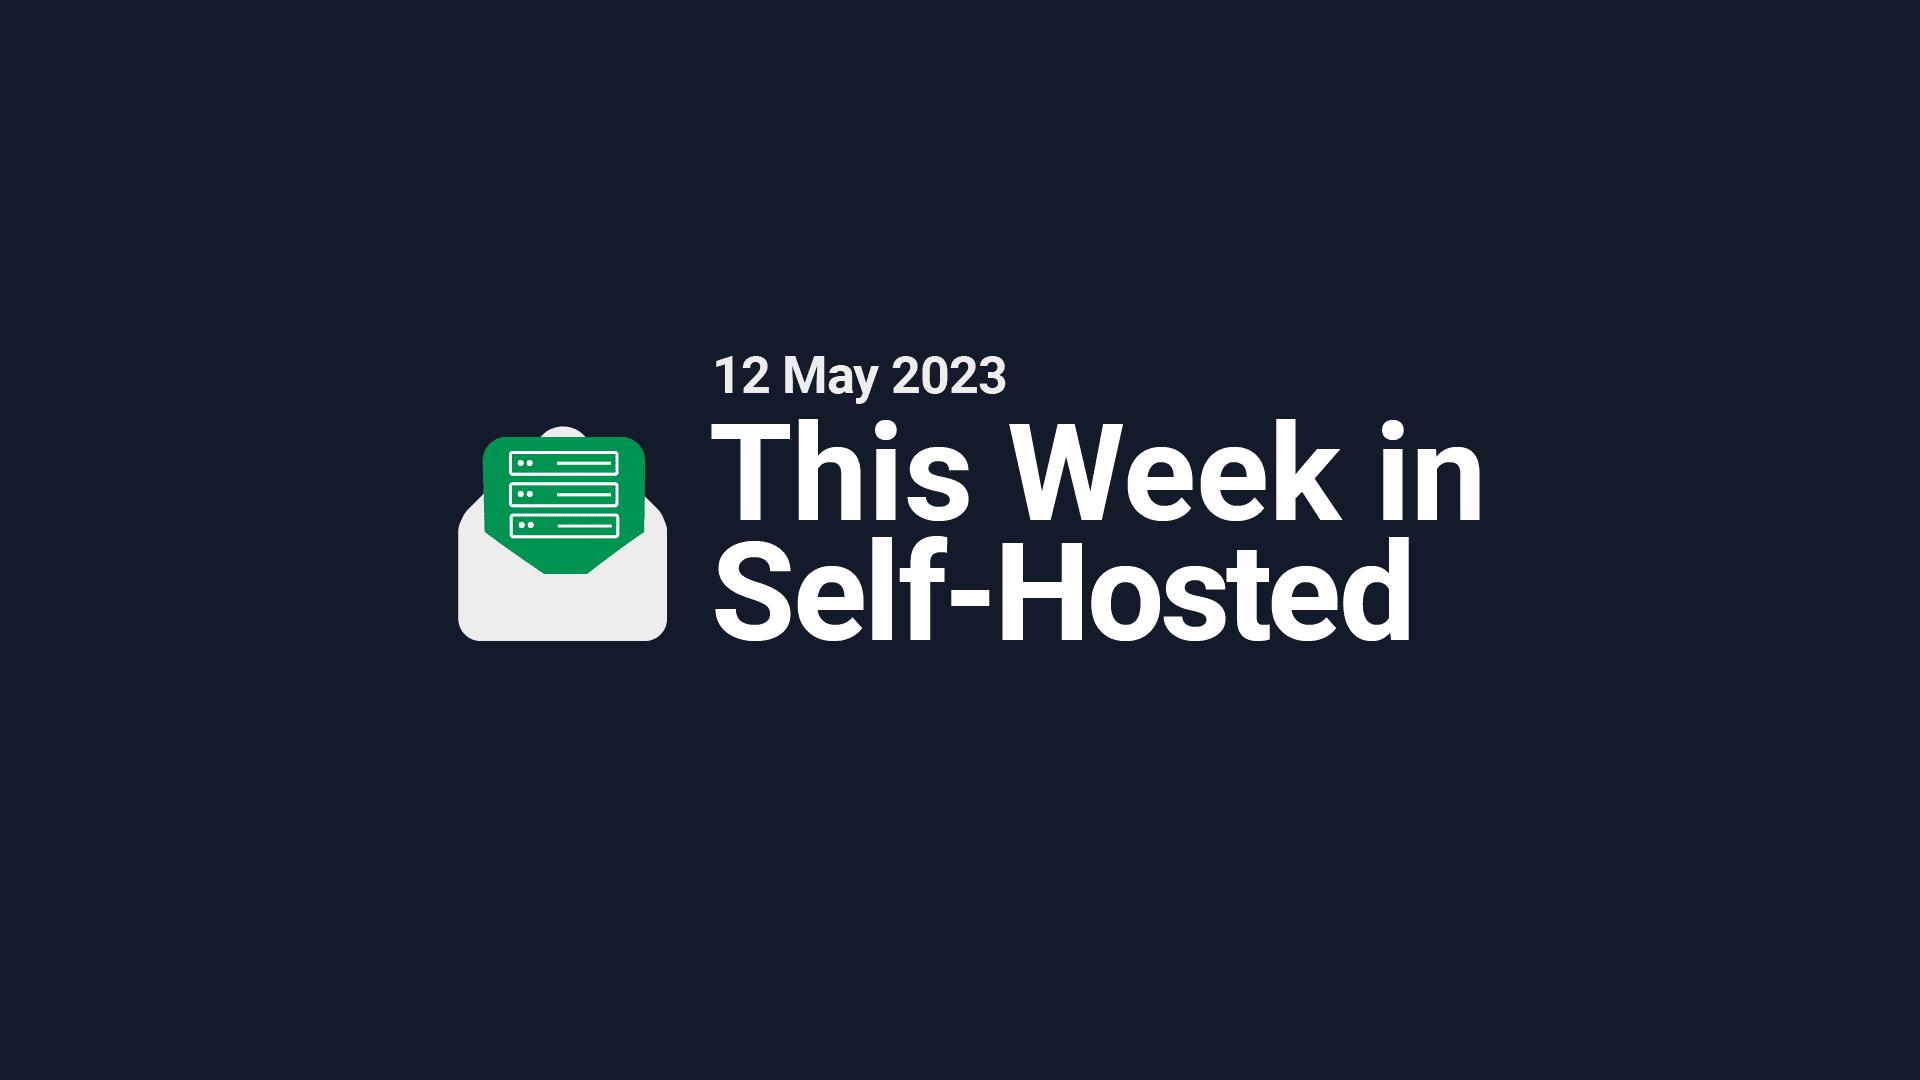 This Week in Self-Hosted (12 May 2023) Post image